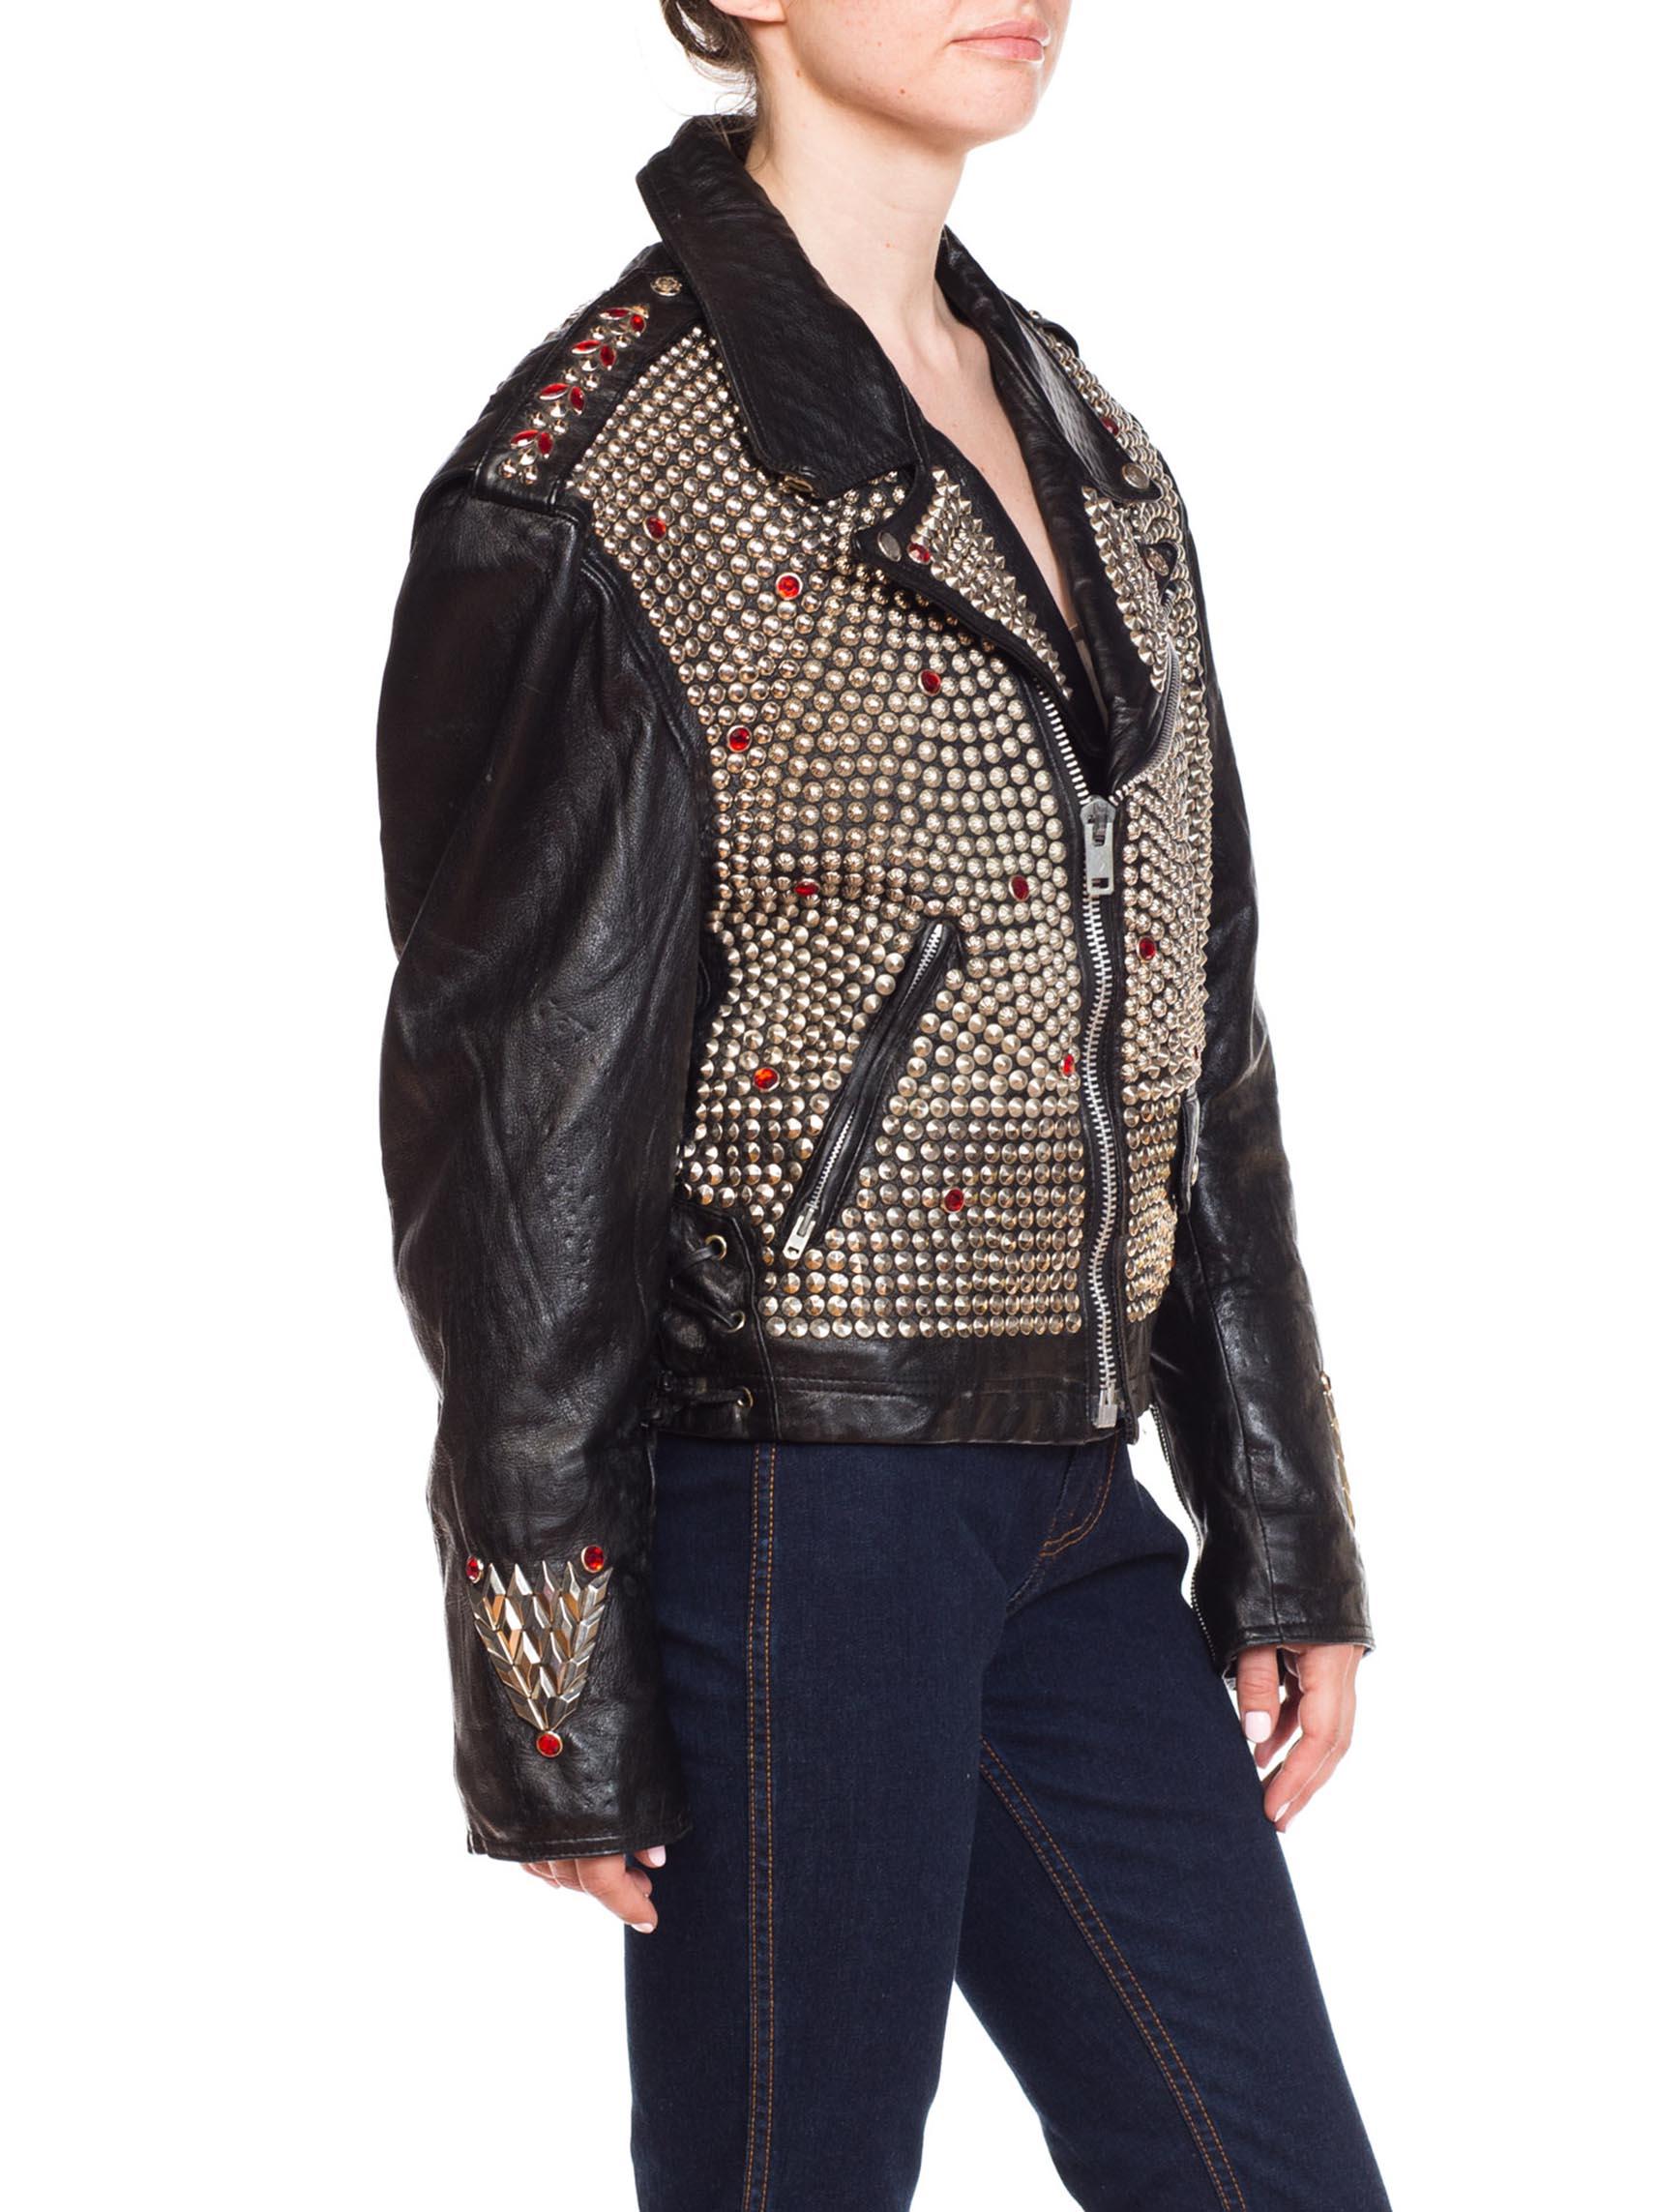 Black 1990S JEFF HAMILTON Men's Studded Leather Biker Jacket With Crystals And Eagle For Sale